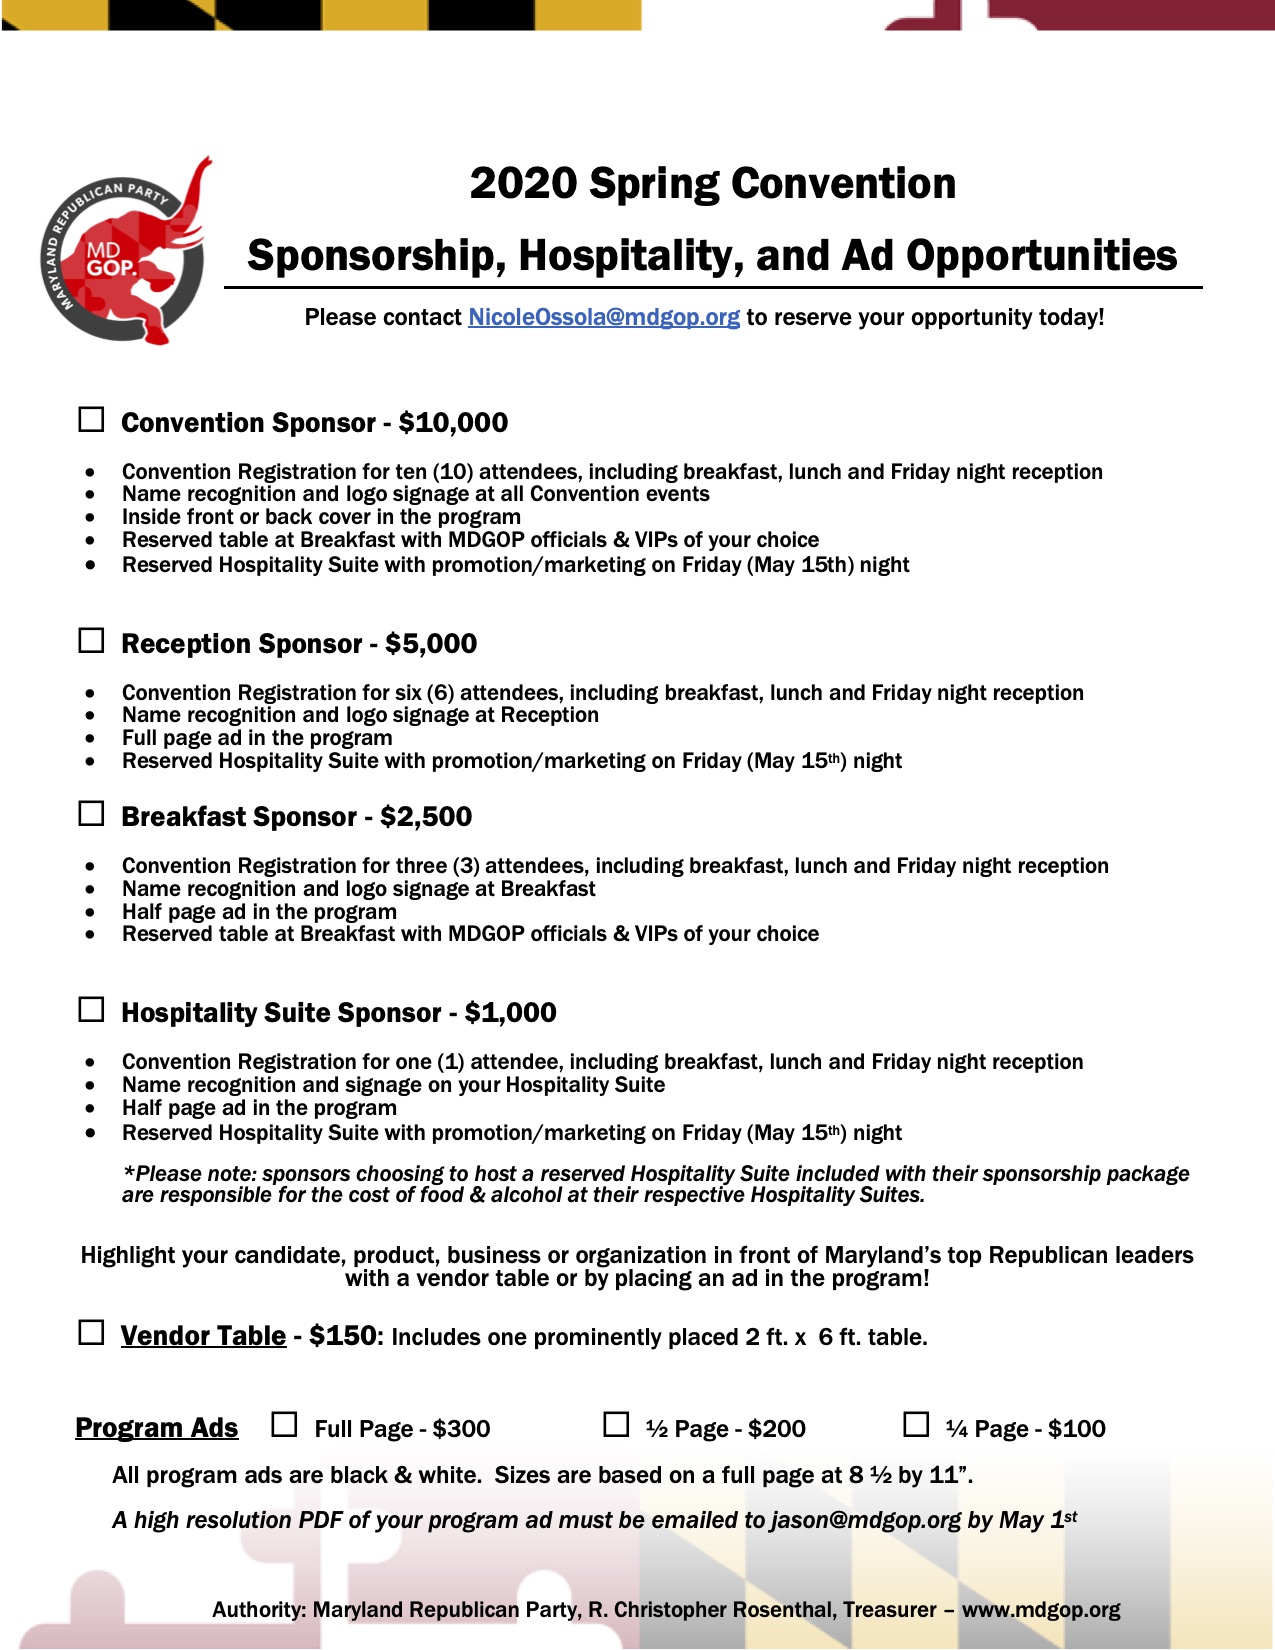 2020 Spring Convention Packet pg7